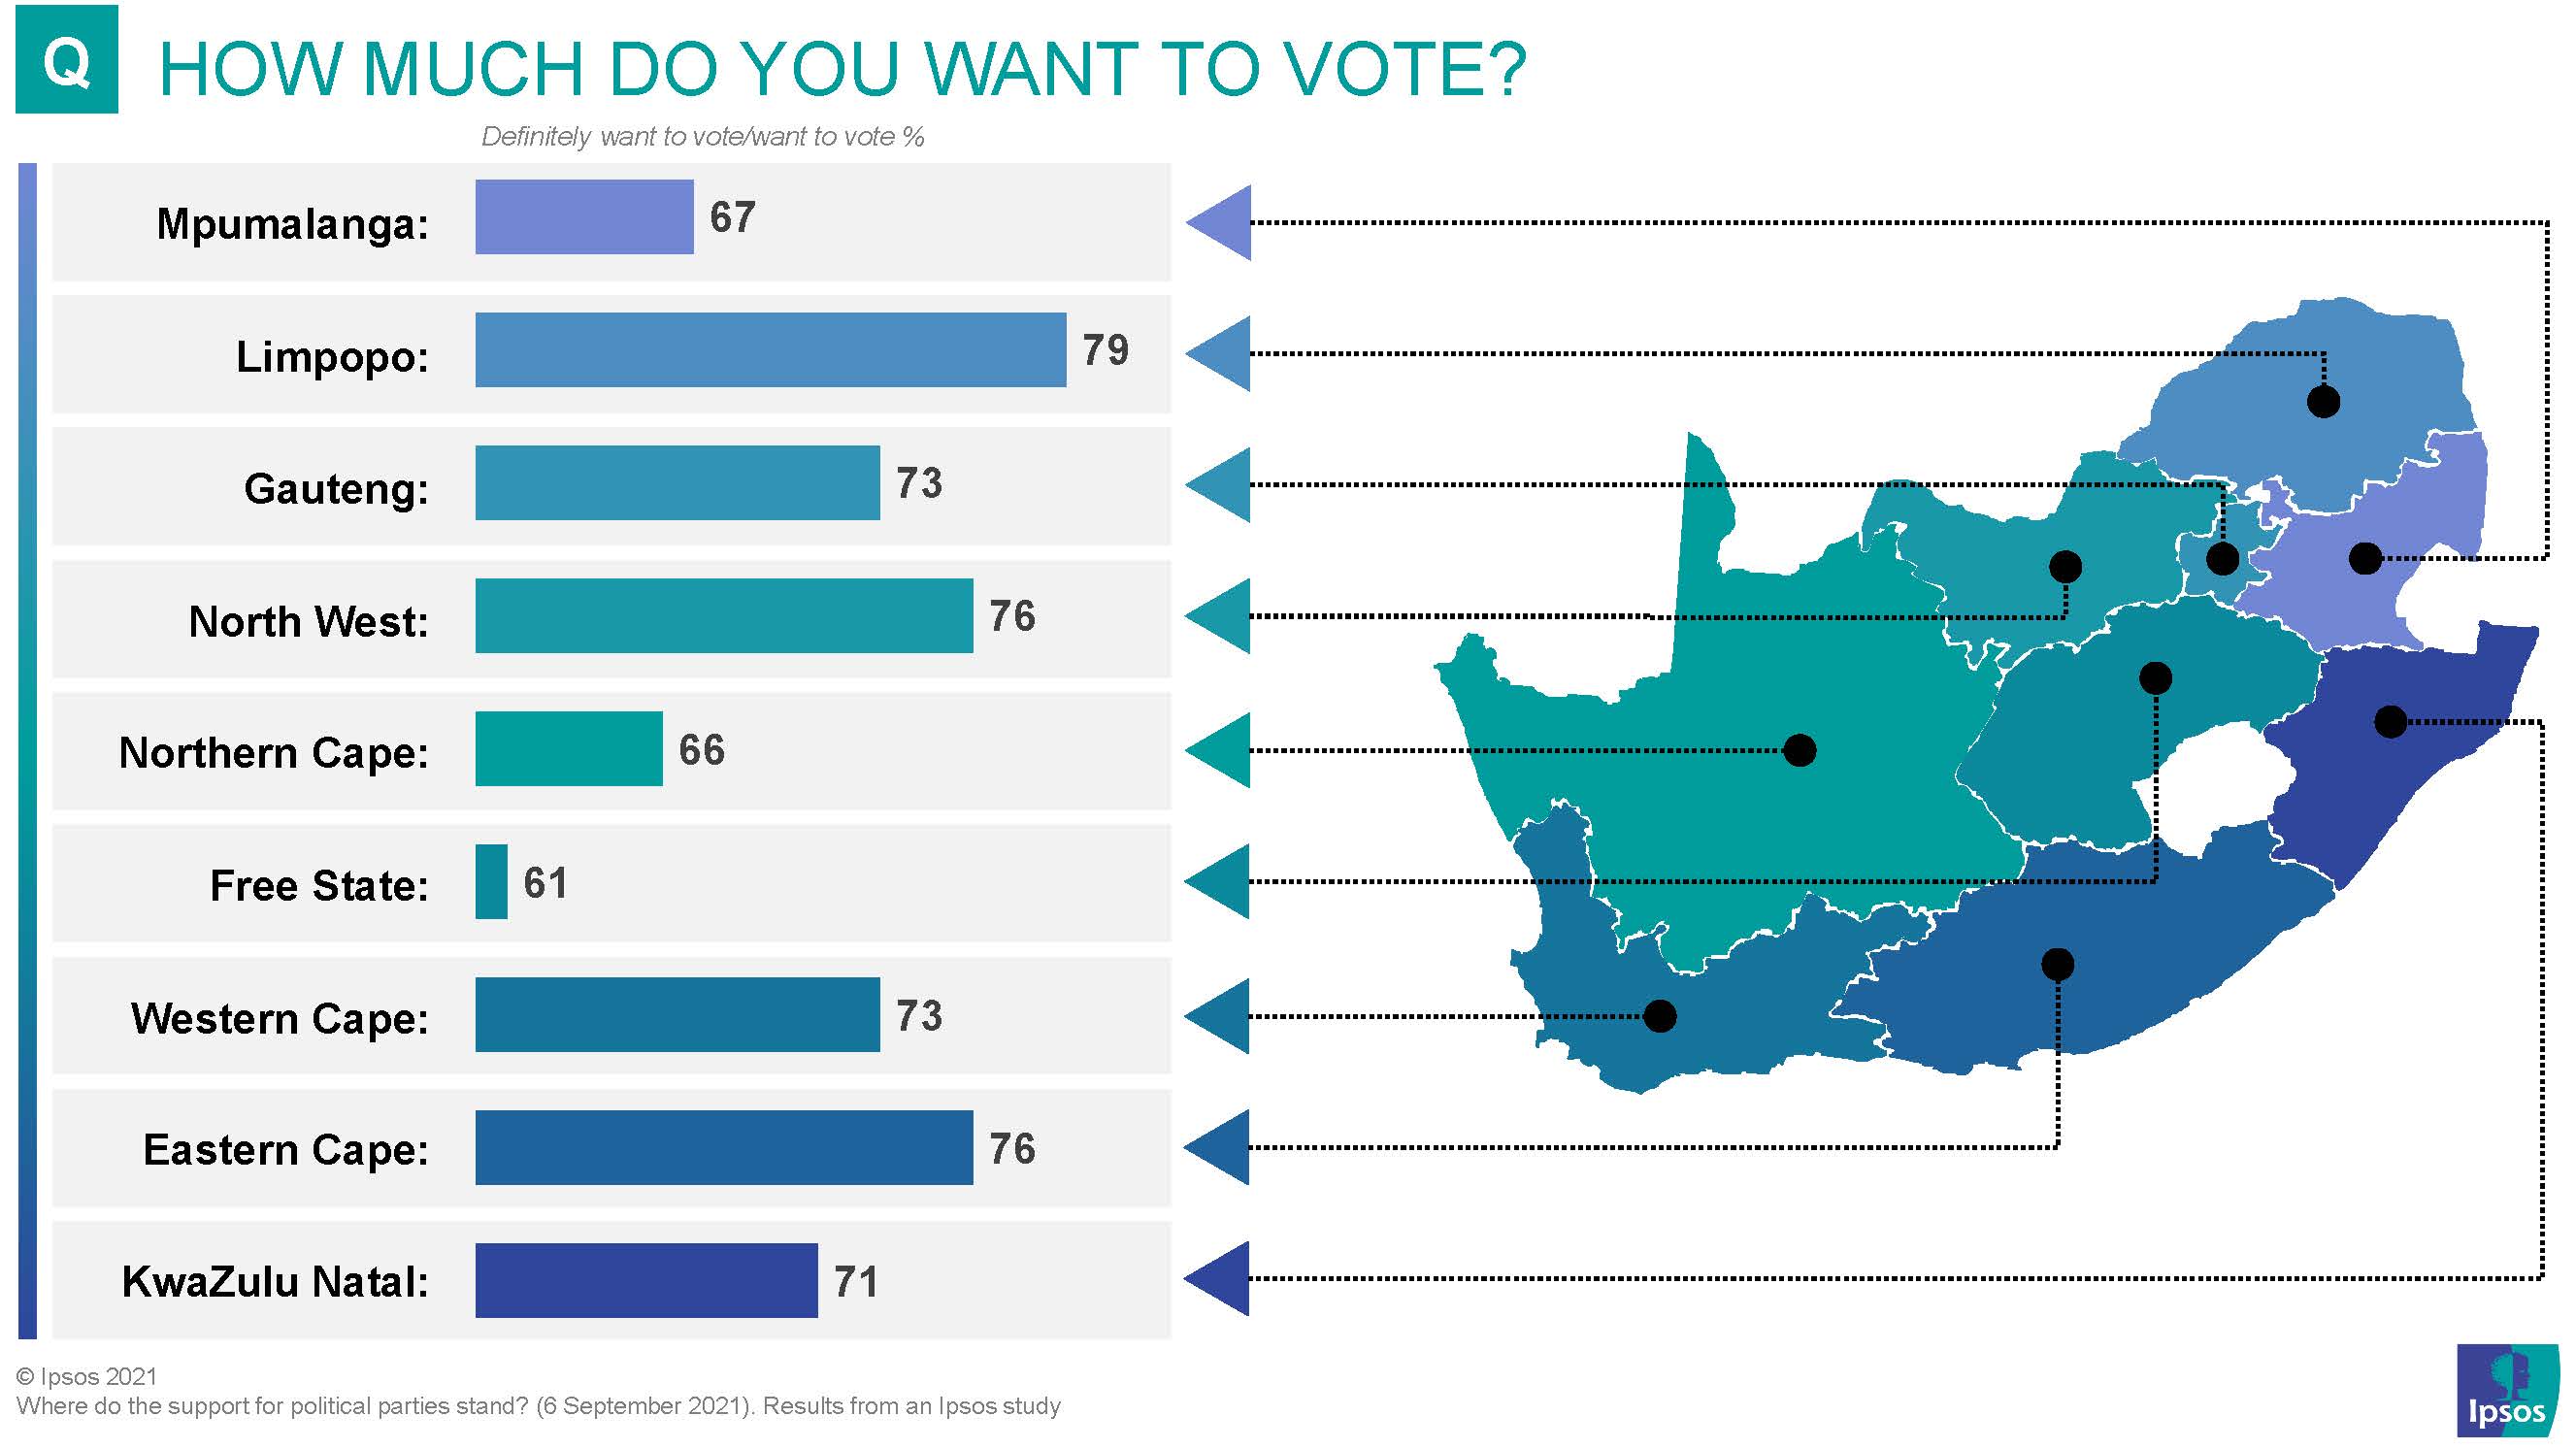 how much do you want to vote, by region, gauteng, north west, northern cape, free state, western cape, eastern cape, kwazulu natal, mpumalanga, limpopo